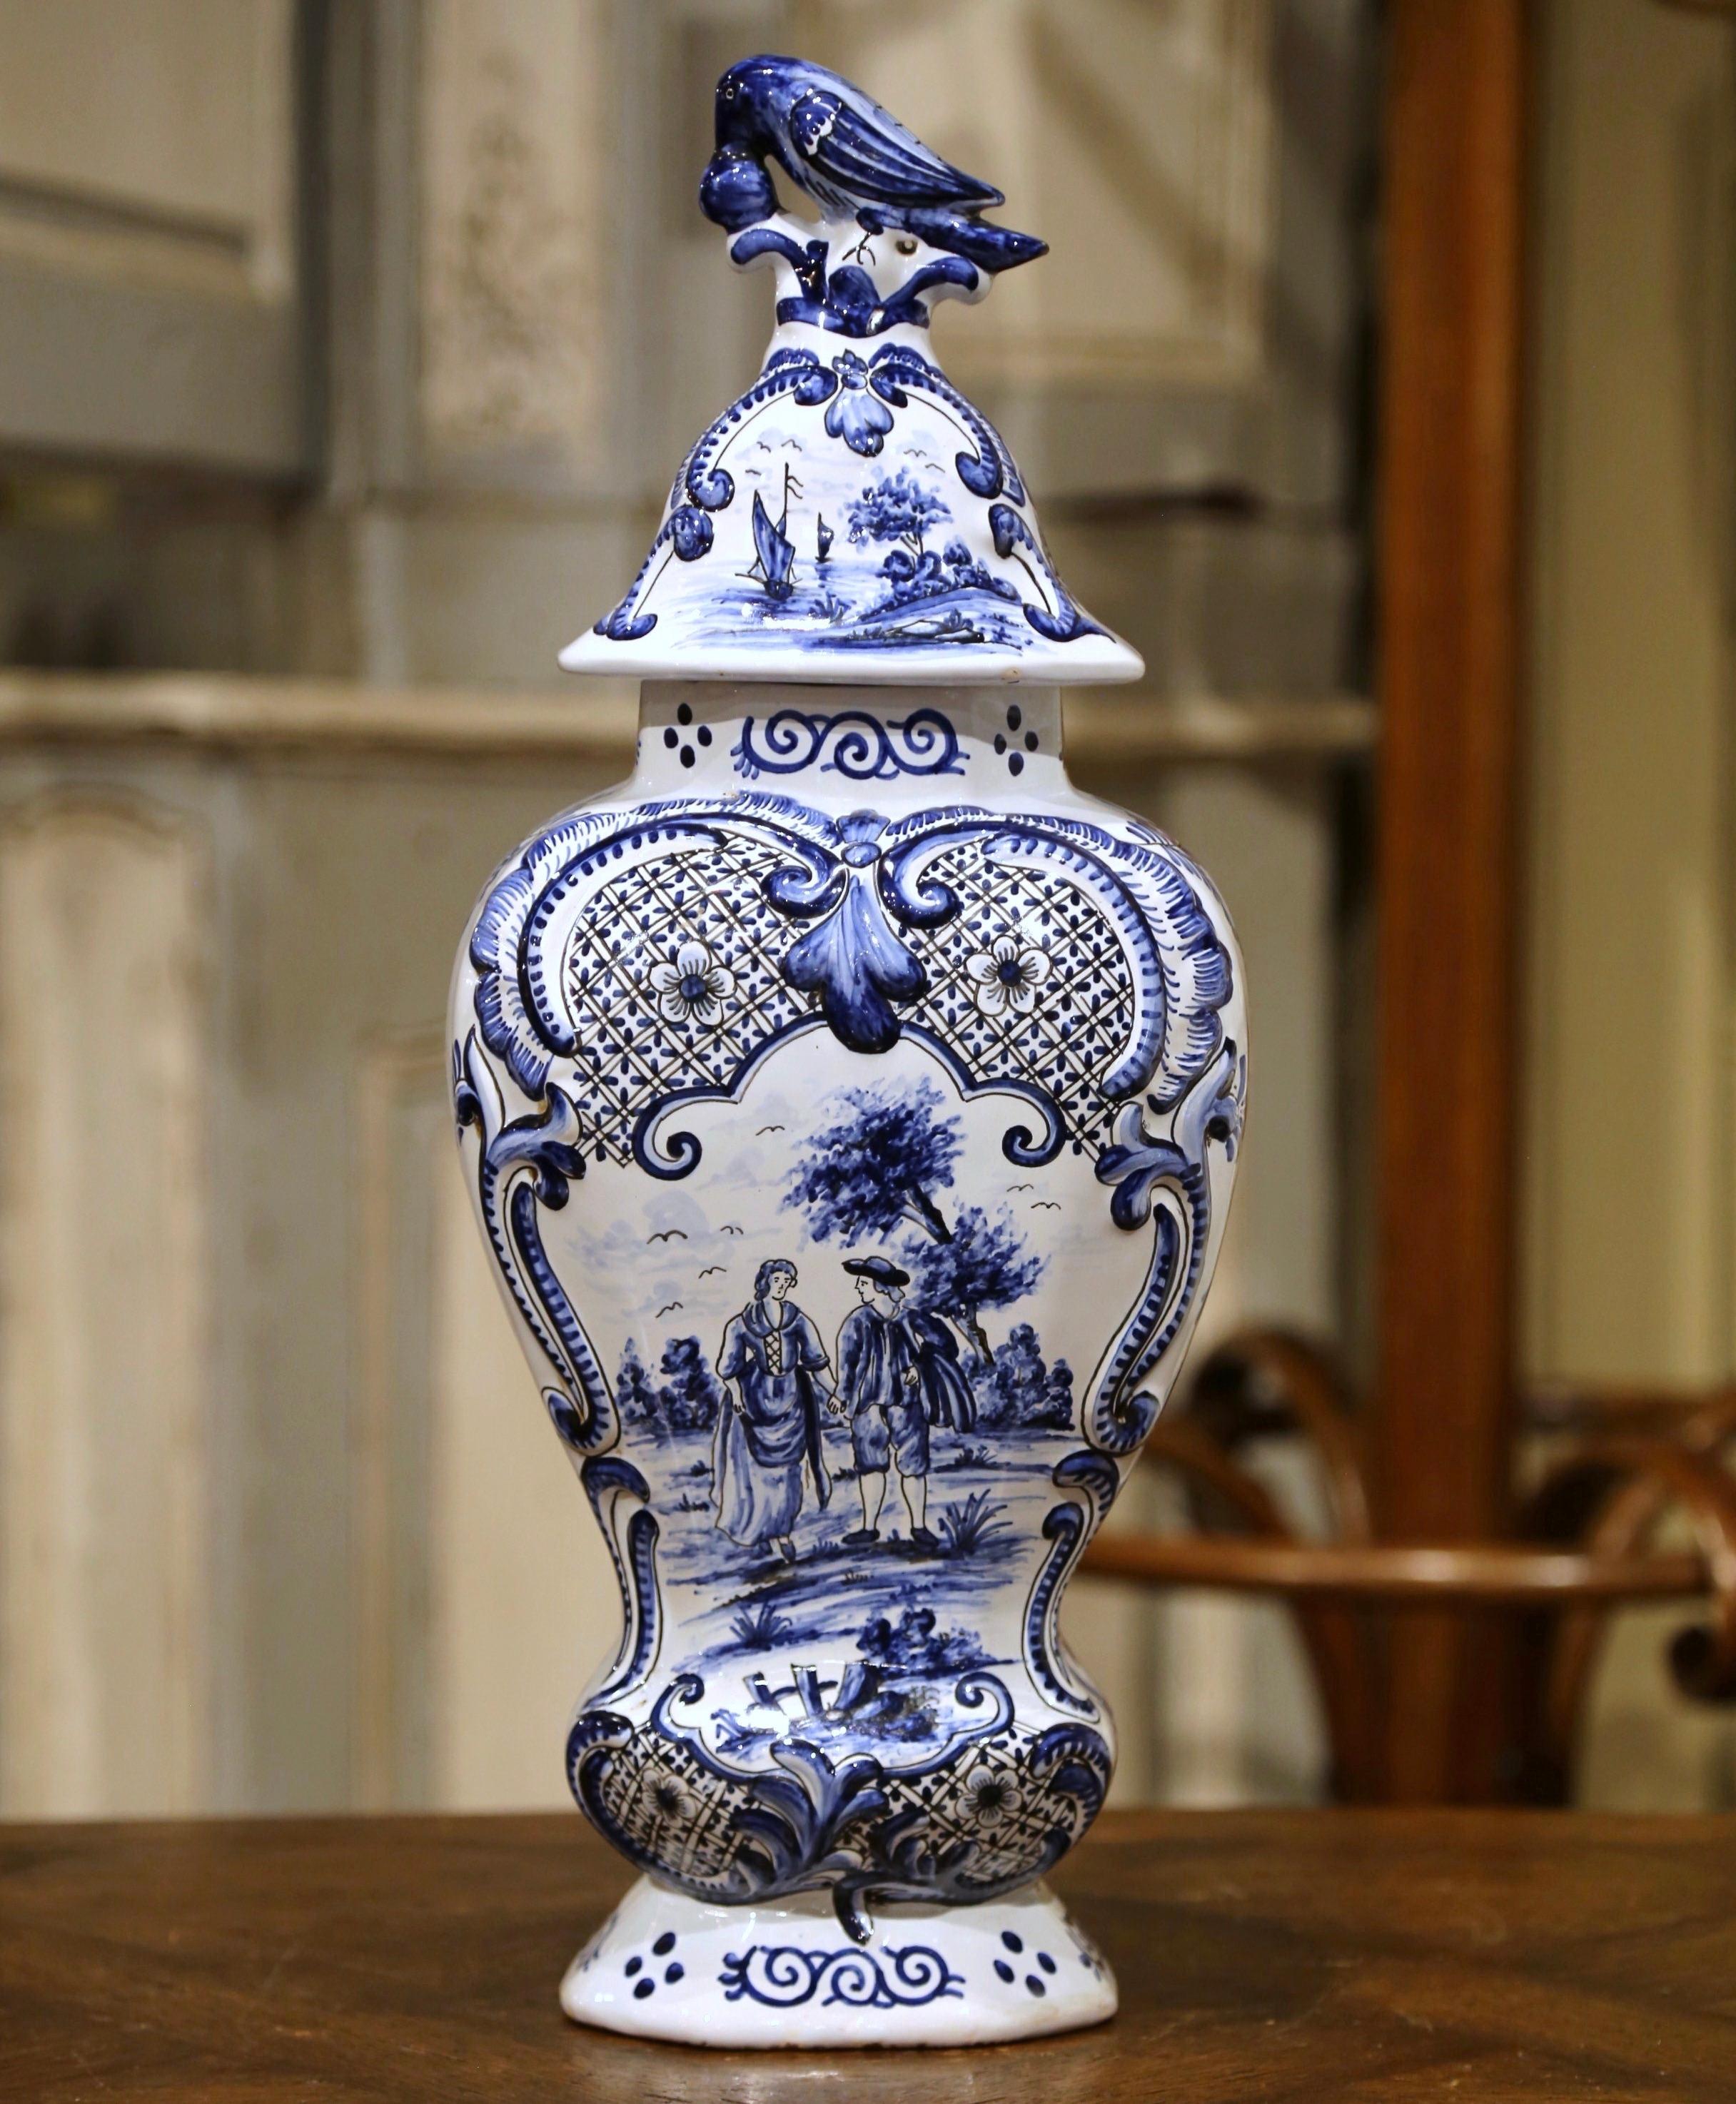 This Classic blue and white Delft vases were created in France, circa 1860. Each porcelain jar is decorated with finely painted, romantic scene medallions and embellished with floral decor in high relief. Each lid is embellished with a sculpted bird